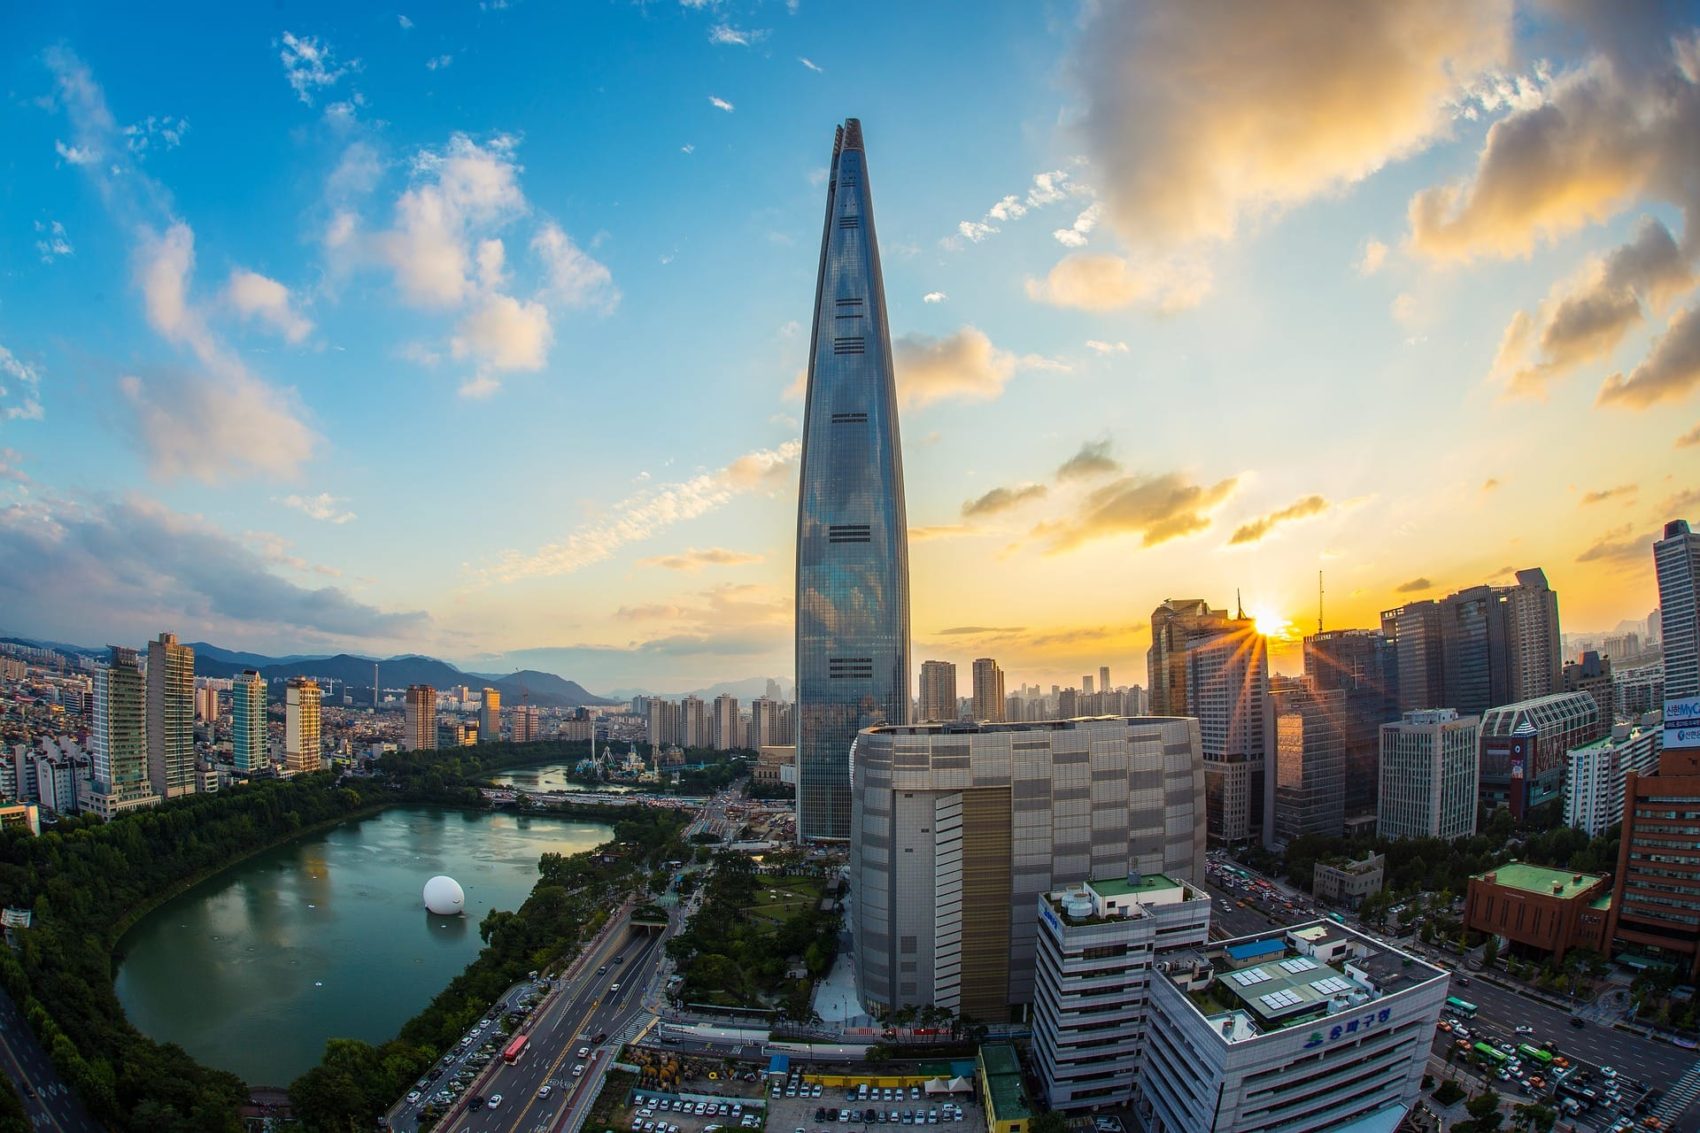 South Korea economy growth: measuring the investment potential